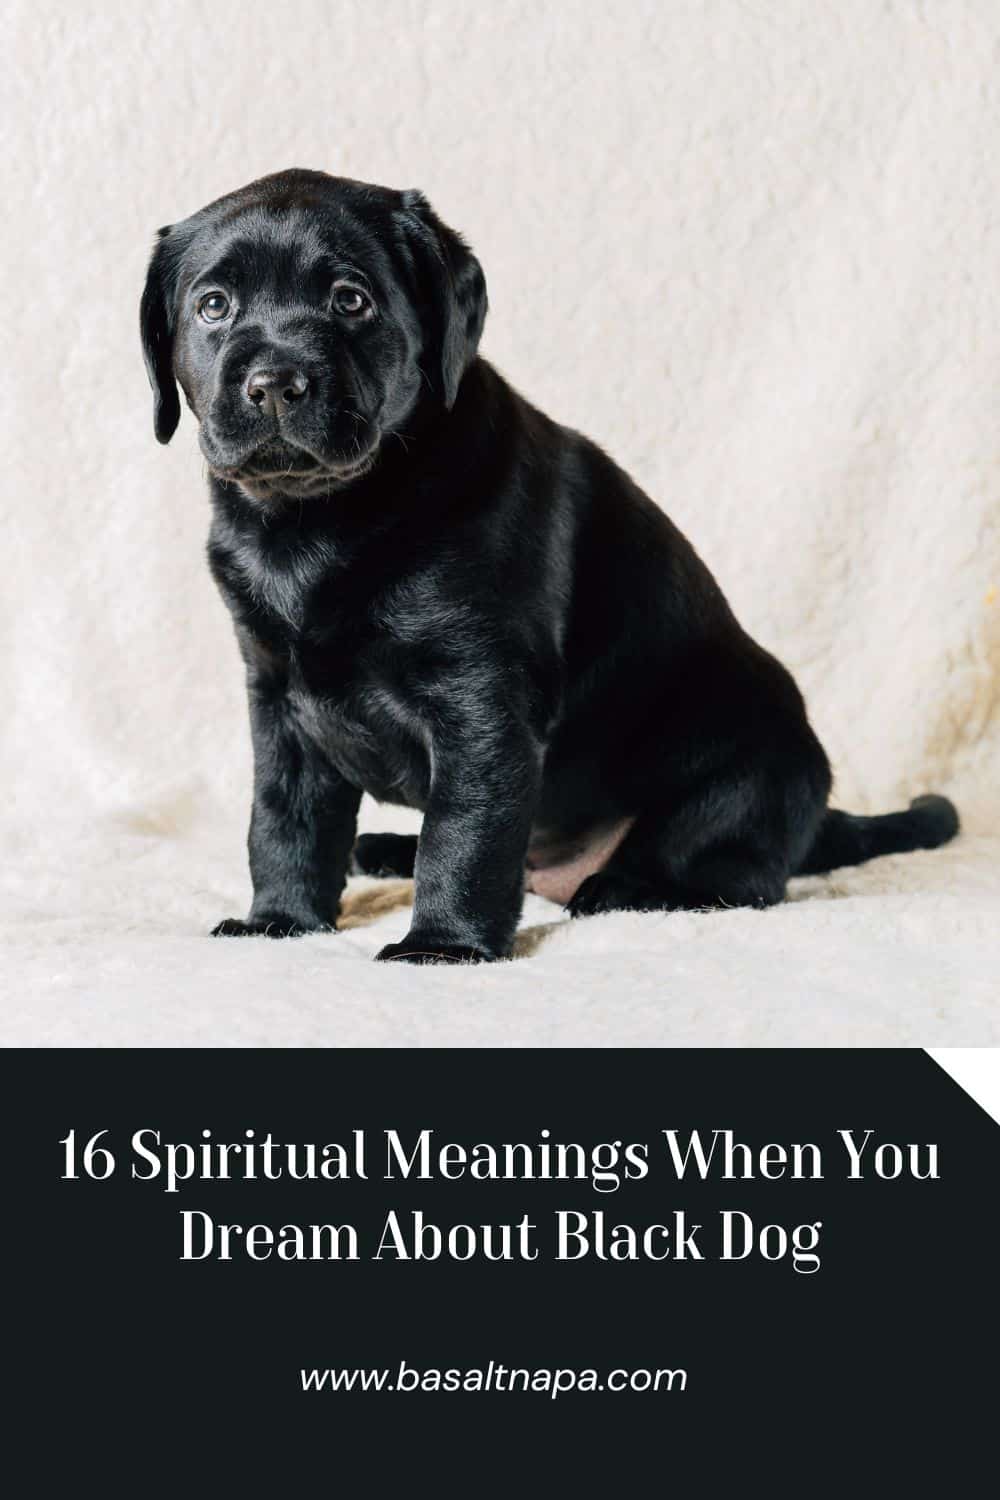 16 Spiritual Meanings When You Dream About Black Dog